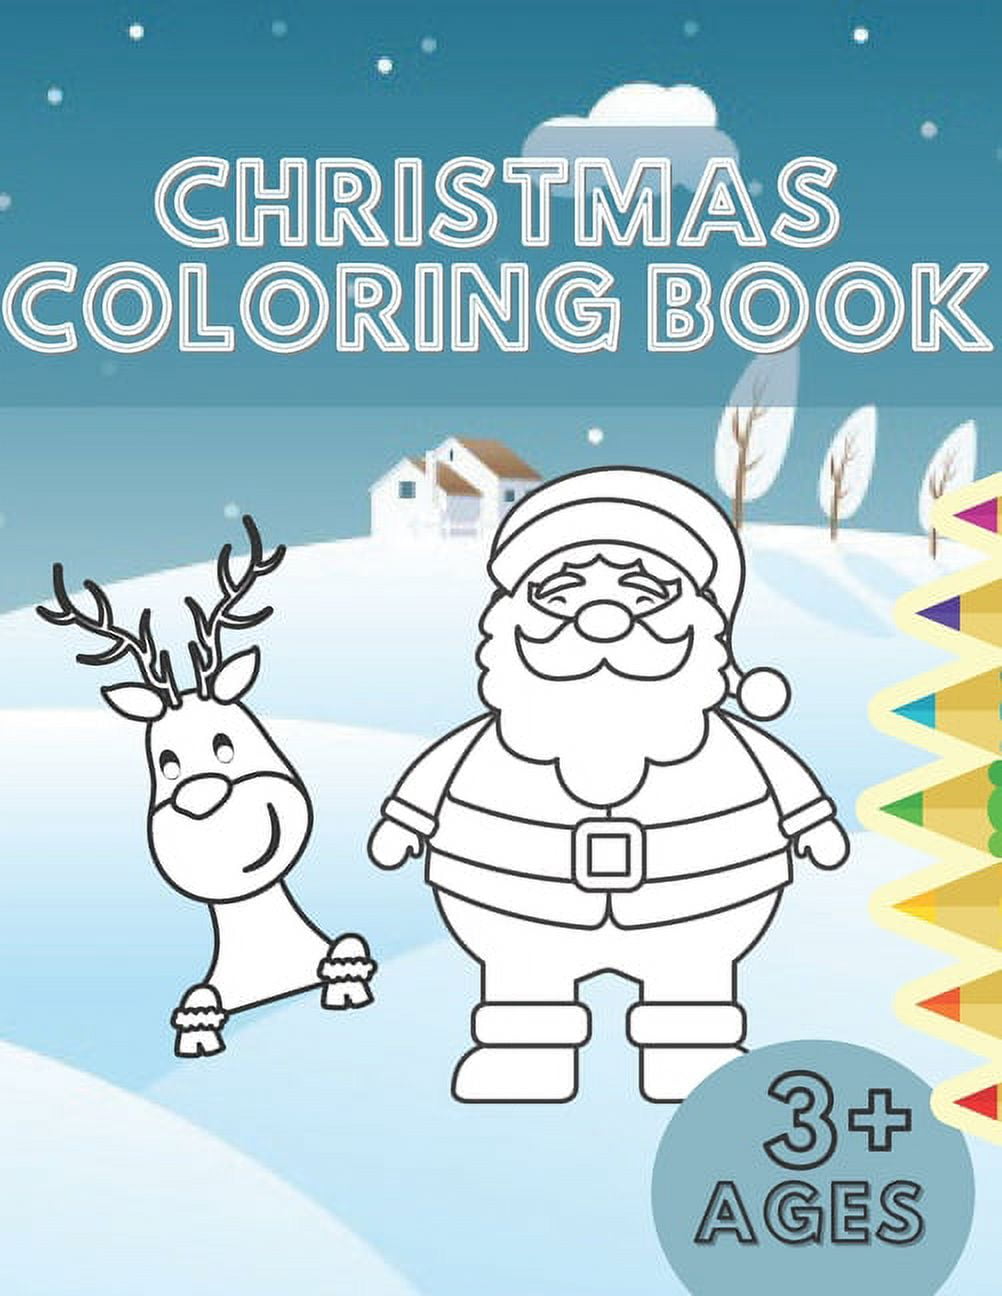 HELLO KITTY CHRISTMAS coloring book FOR KIDS: Anxiety CHRISTMAS Coloring  Books For Adults And Kids Relaxation And Stress Relief (Paperback)